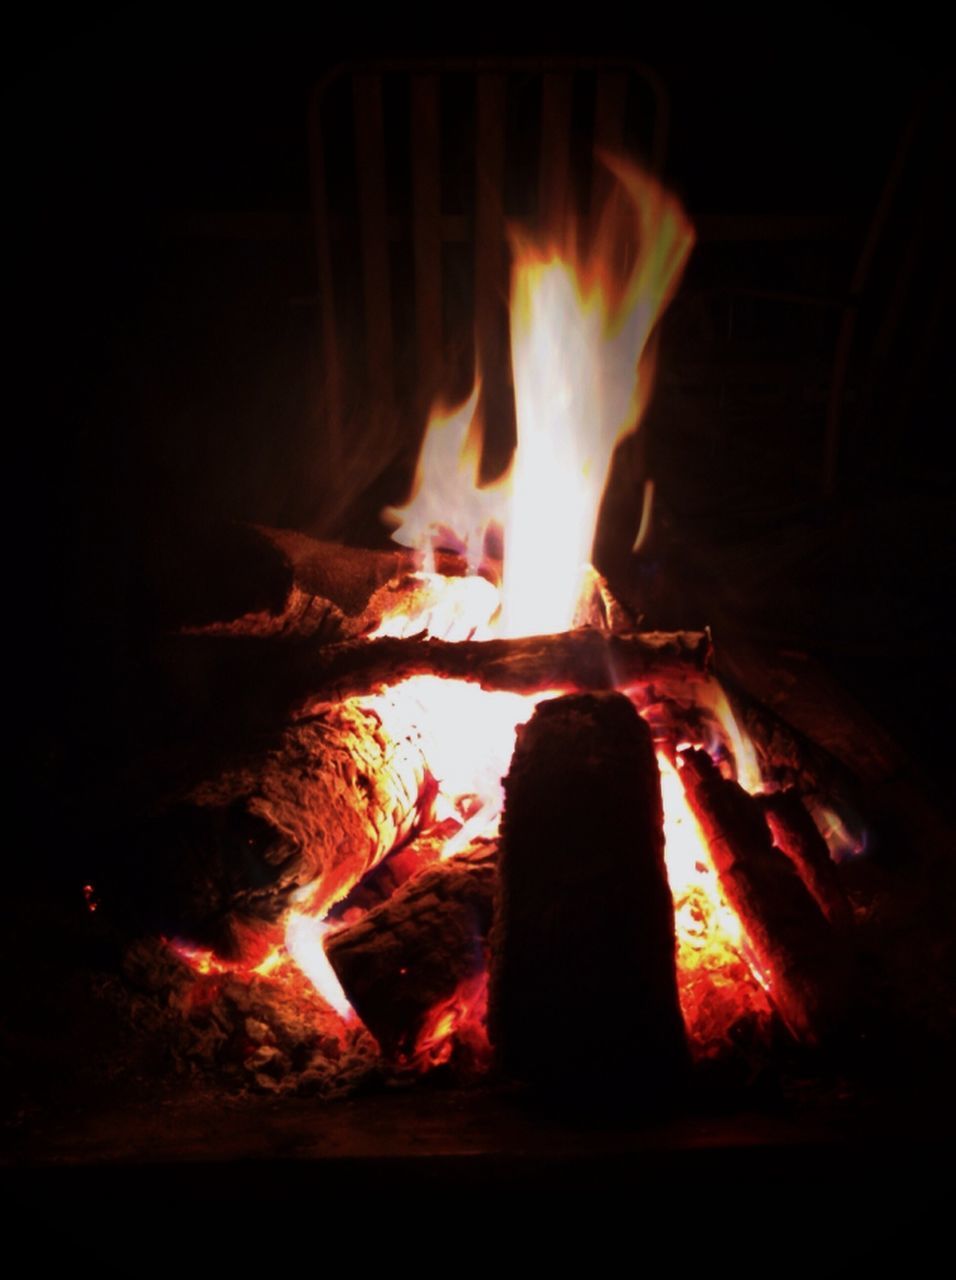 burning, flame, fire - natural phenomenon, heat - temperature, bonfire, firewood, glowing, night, fire, heat, campfire, dark, motion, fireplace, orange color, close-up, wood - material, light - natural phenomenon, log, no people